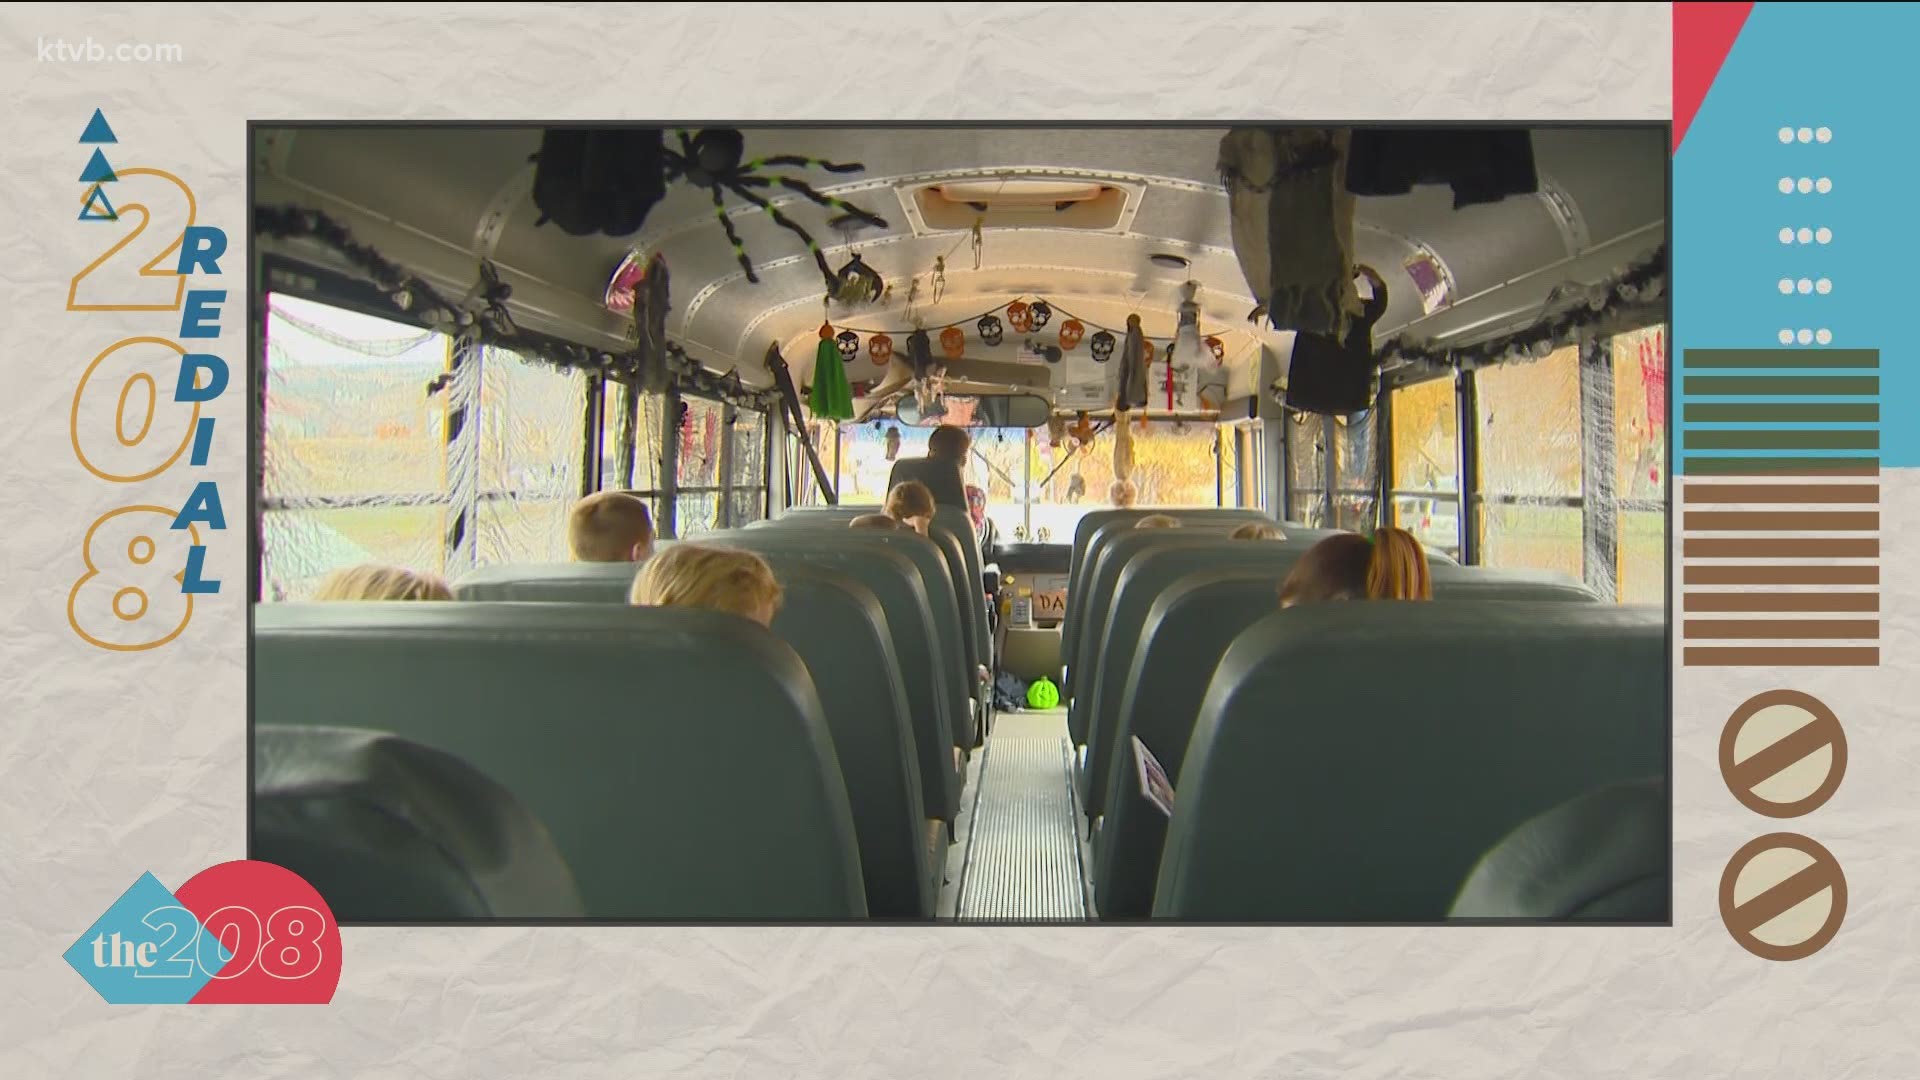 Four years ago, KTVB met an Adams County woman who spends eight hours a day working in a lab, surrounded by blood but drives a haunted school bus for kids.